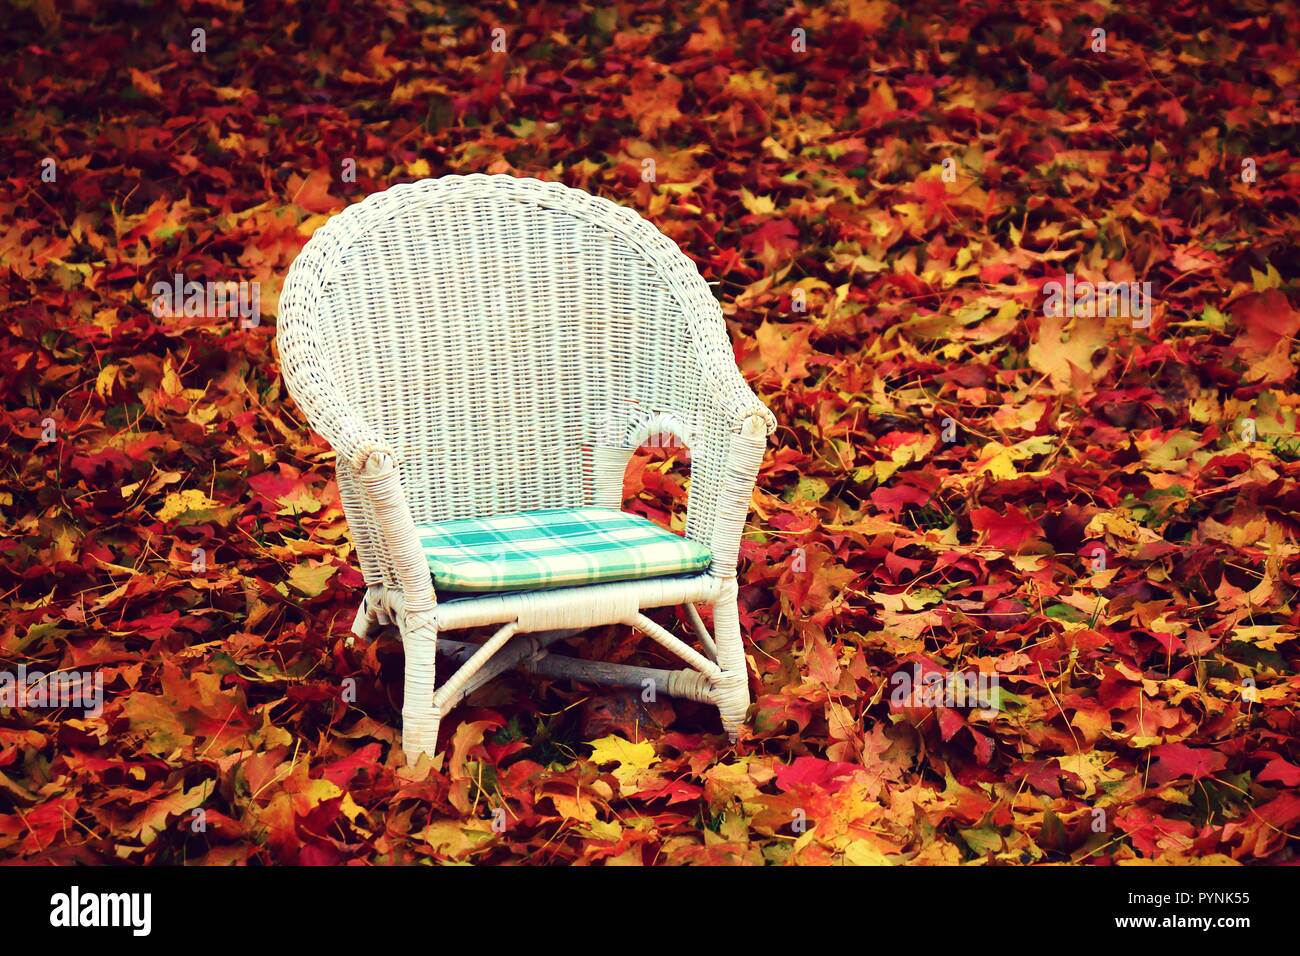 Colorful autumn leaves with a white wicker chair Stock Photo